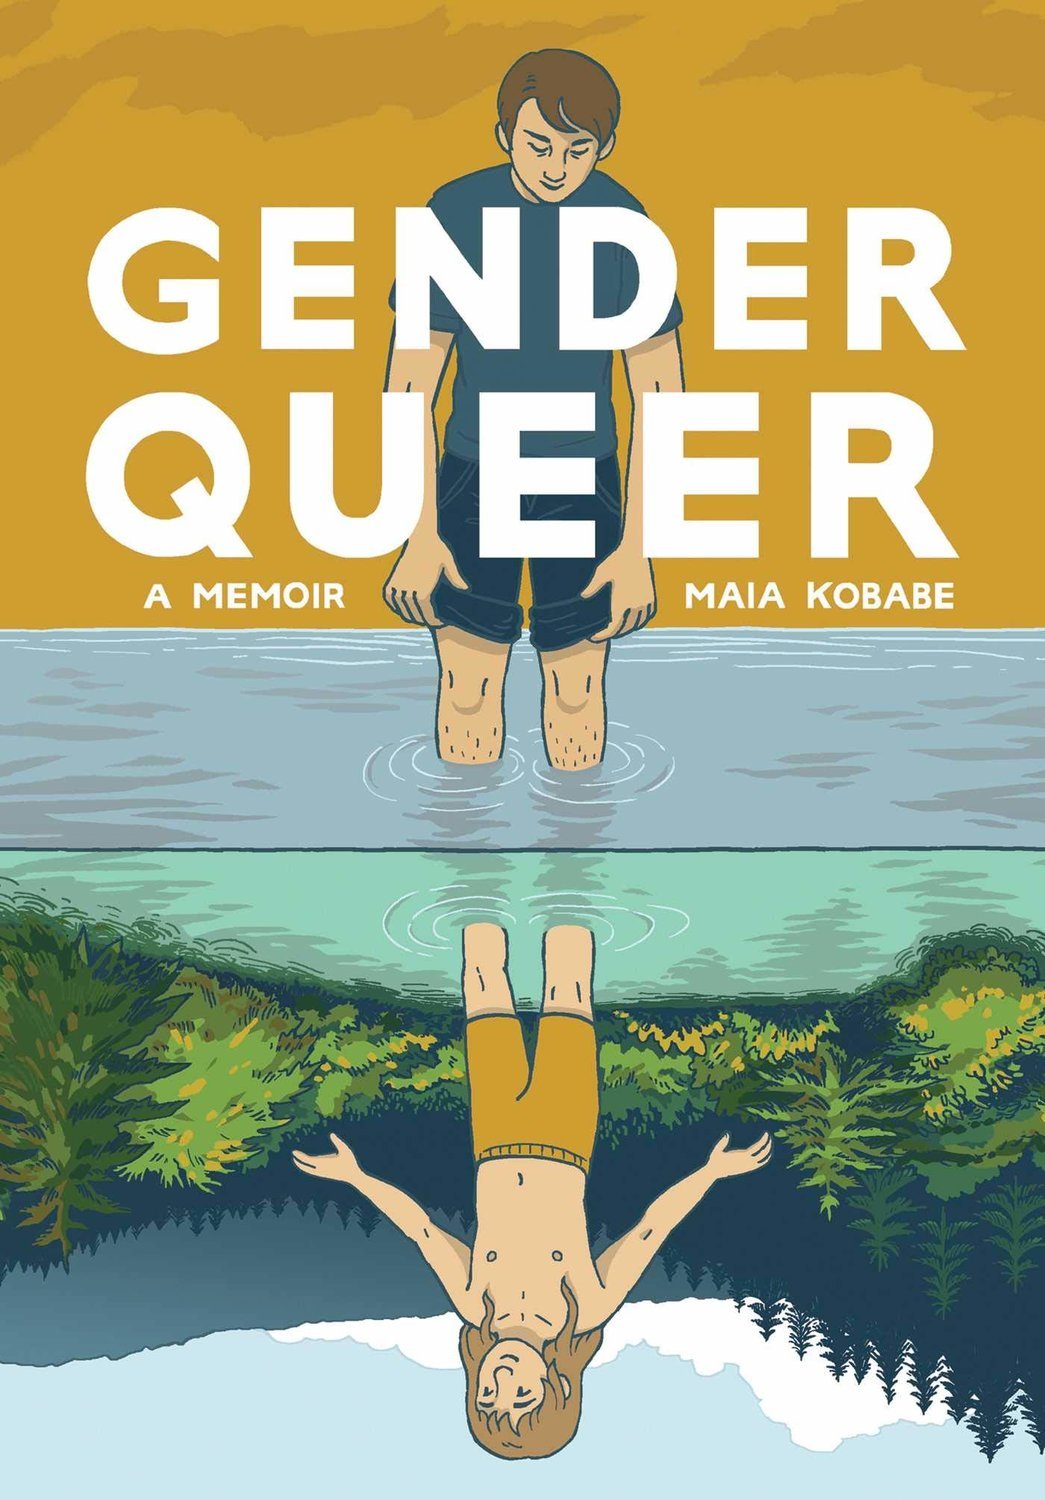 The Connetquot School District’s findings determined that the controversial book, “Gender Queer: A Memoir,” was appropriate for inclusion in the high school library, but was given a mature rating, the only book in the library to have one, and will require parental permission to check out if the student is under 18.